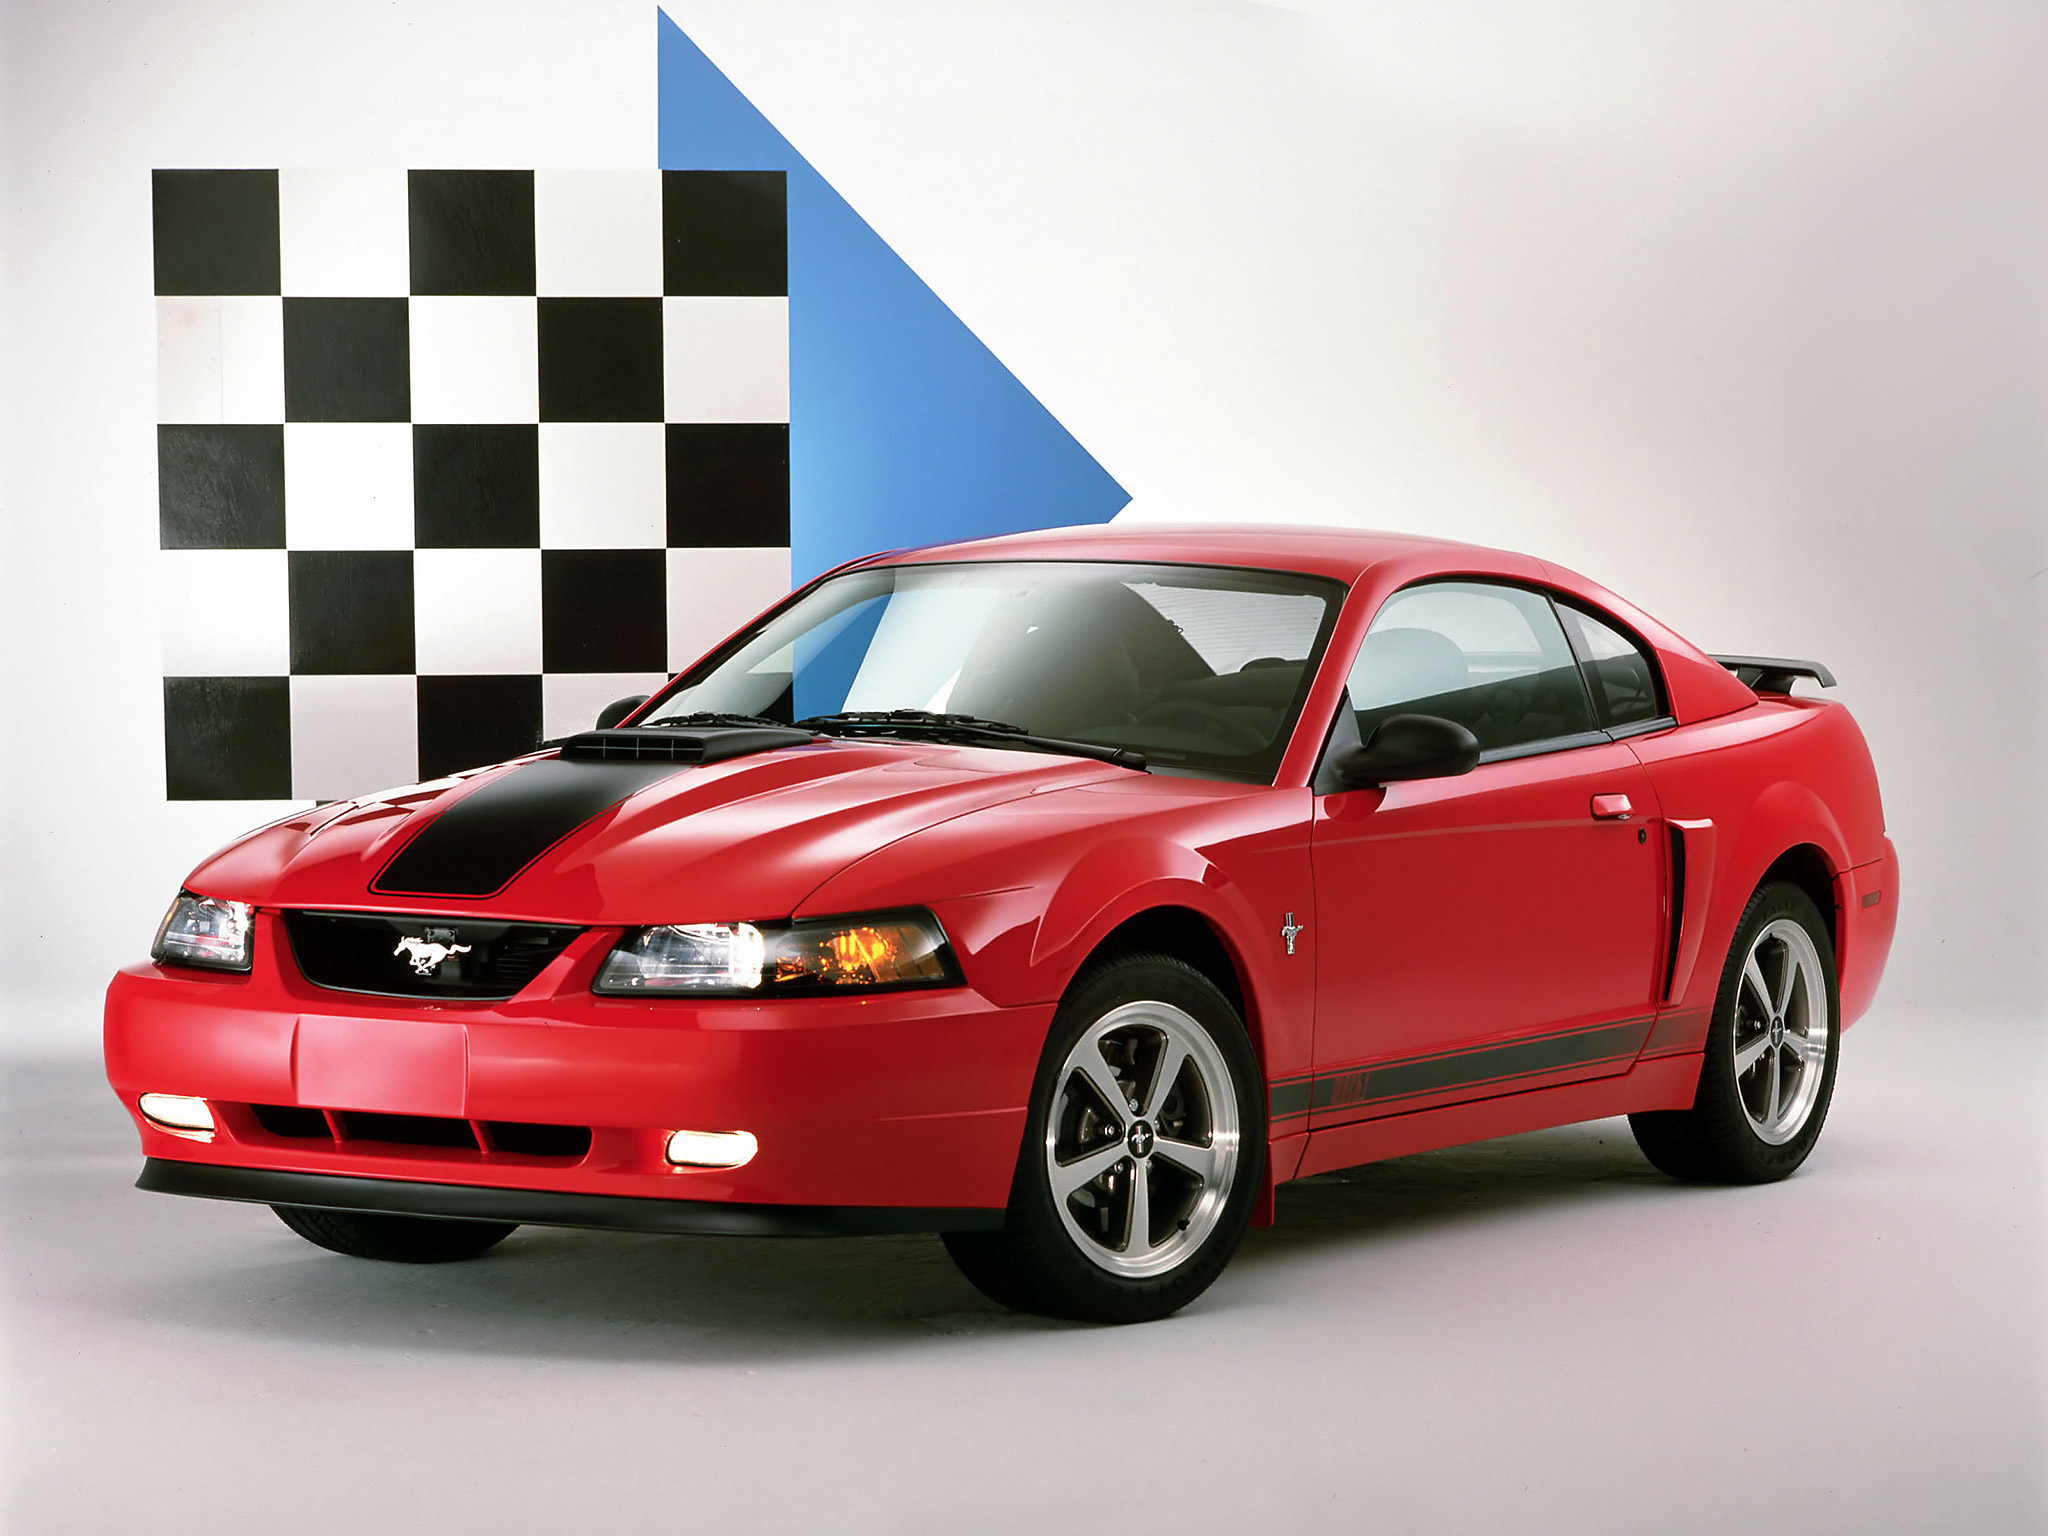 Mustang Of The Day: 2003 Ford Mustang Mach 1